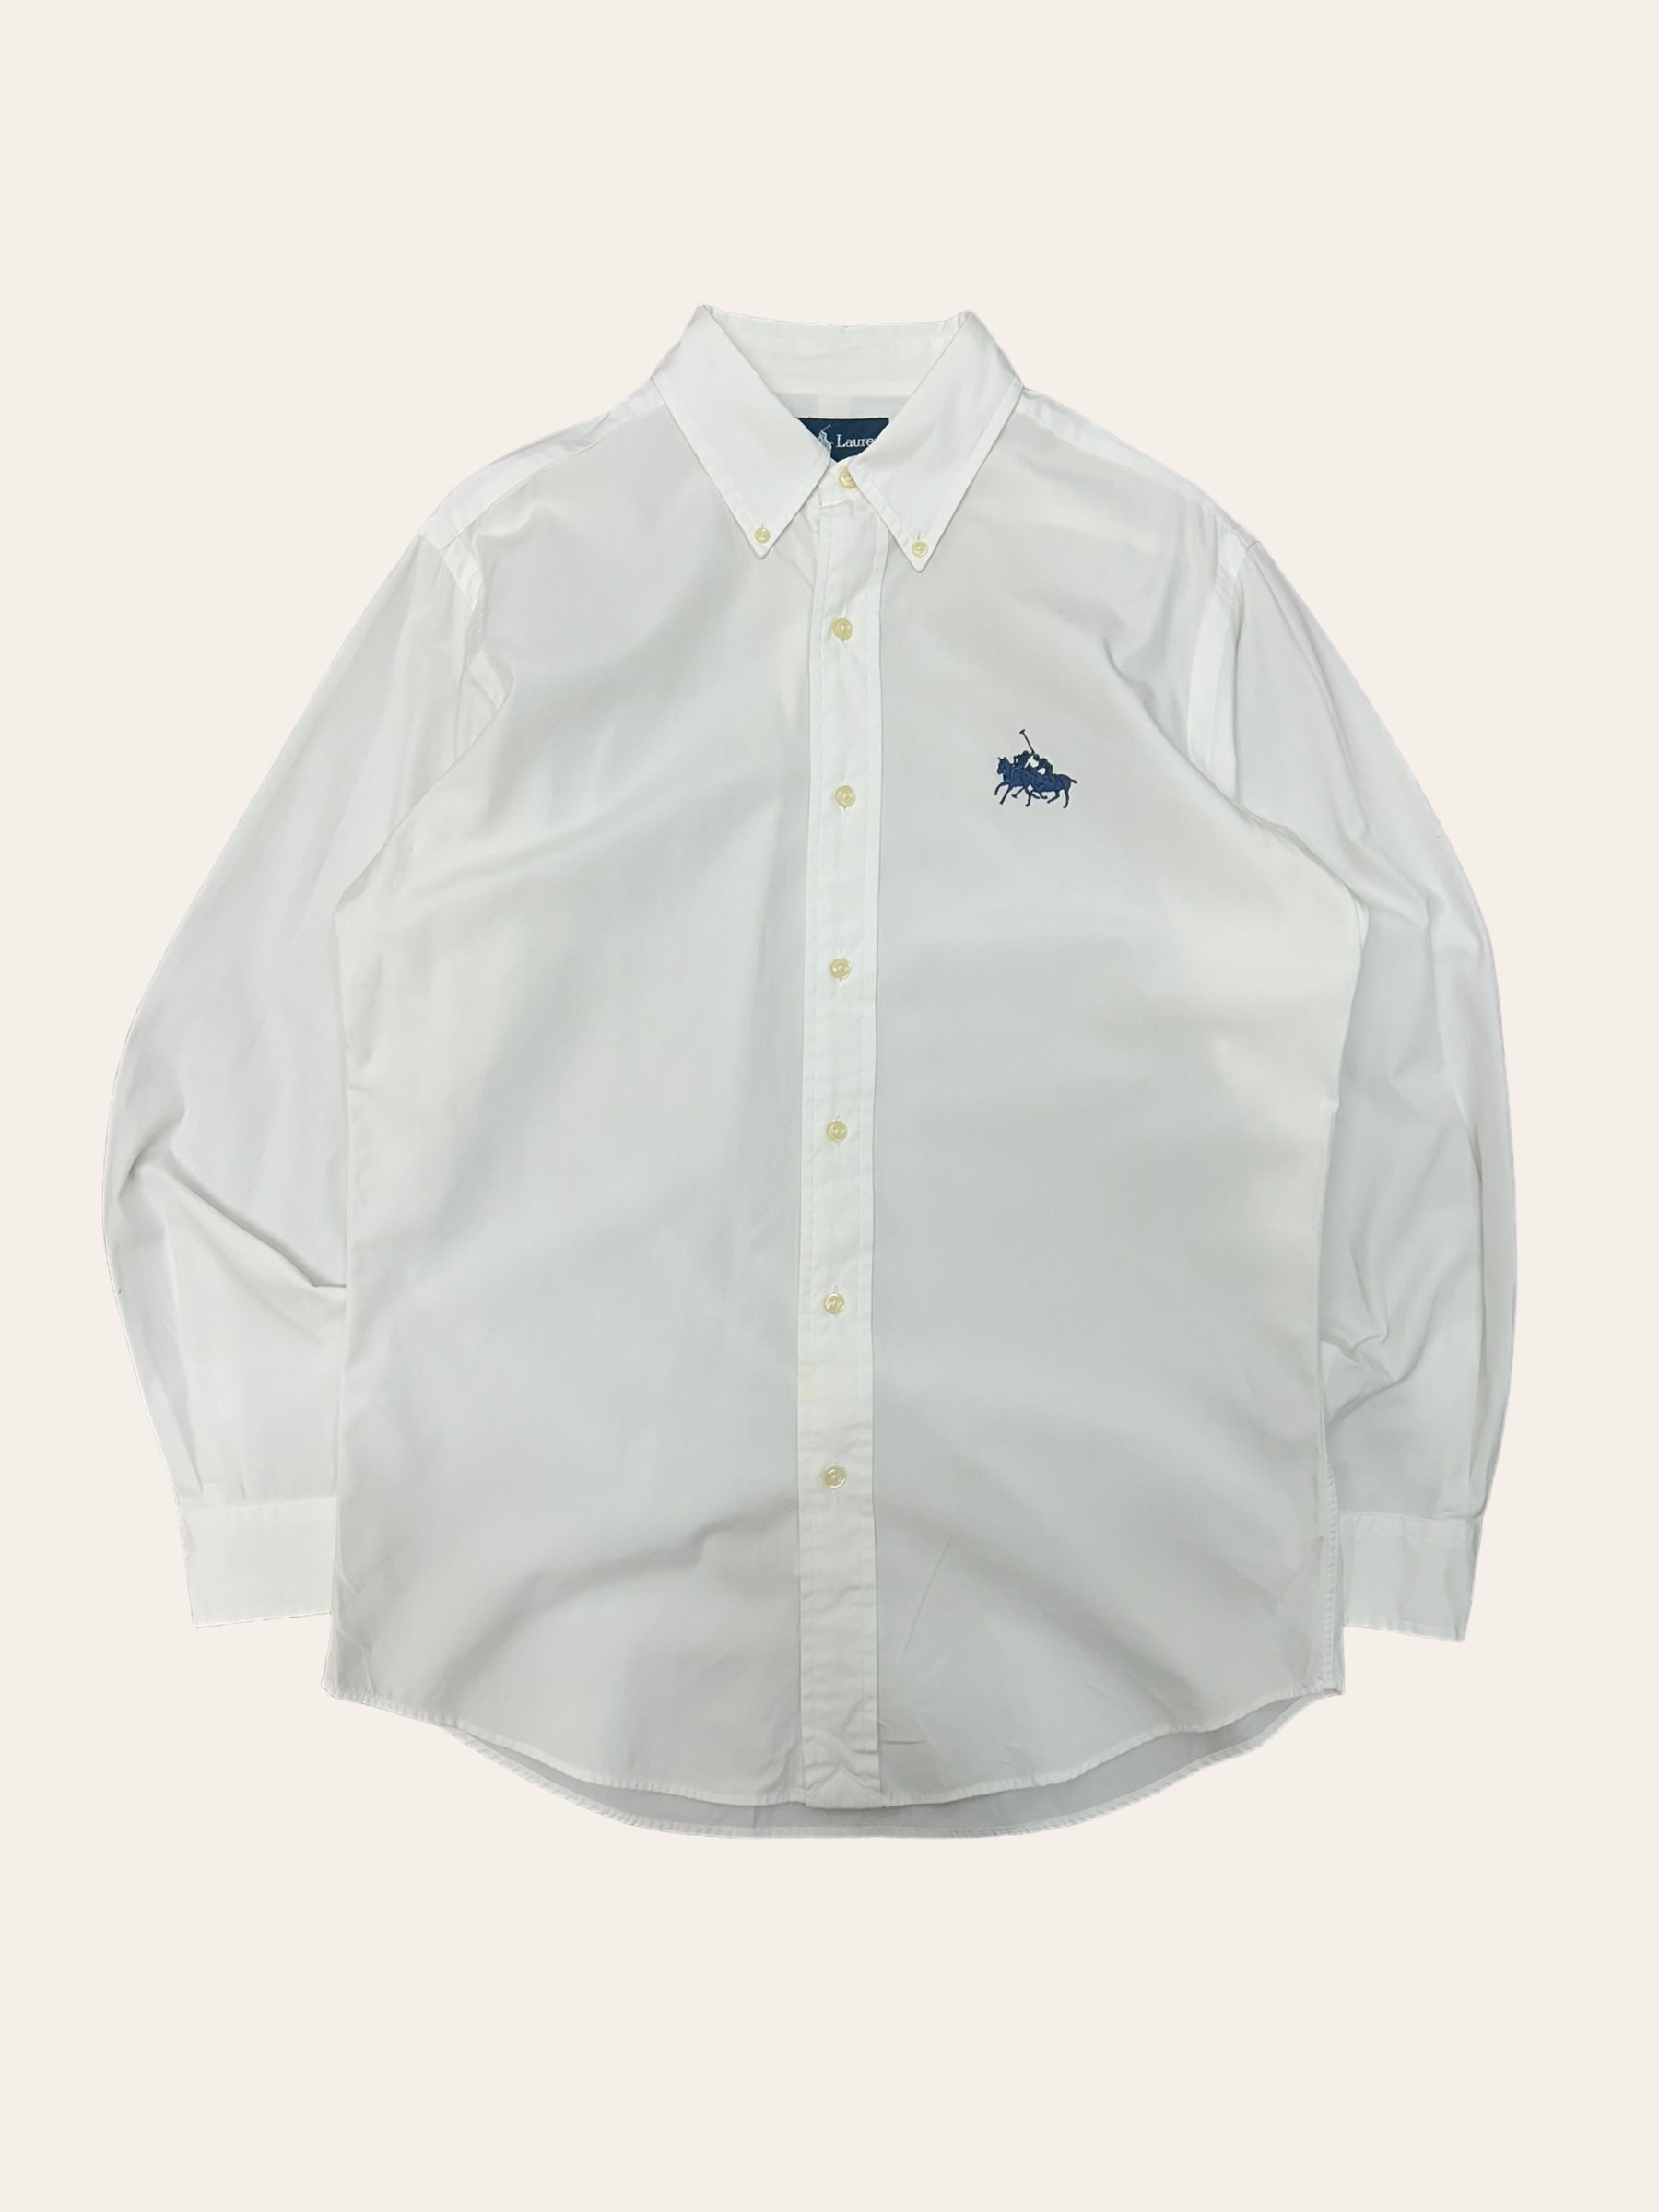 Polo ralph lauren white double pony embroidered shirt M